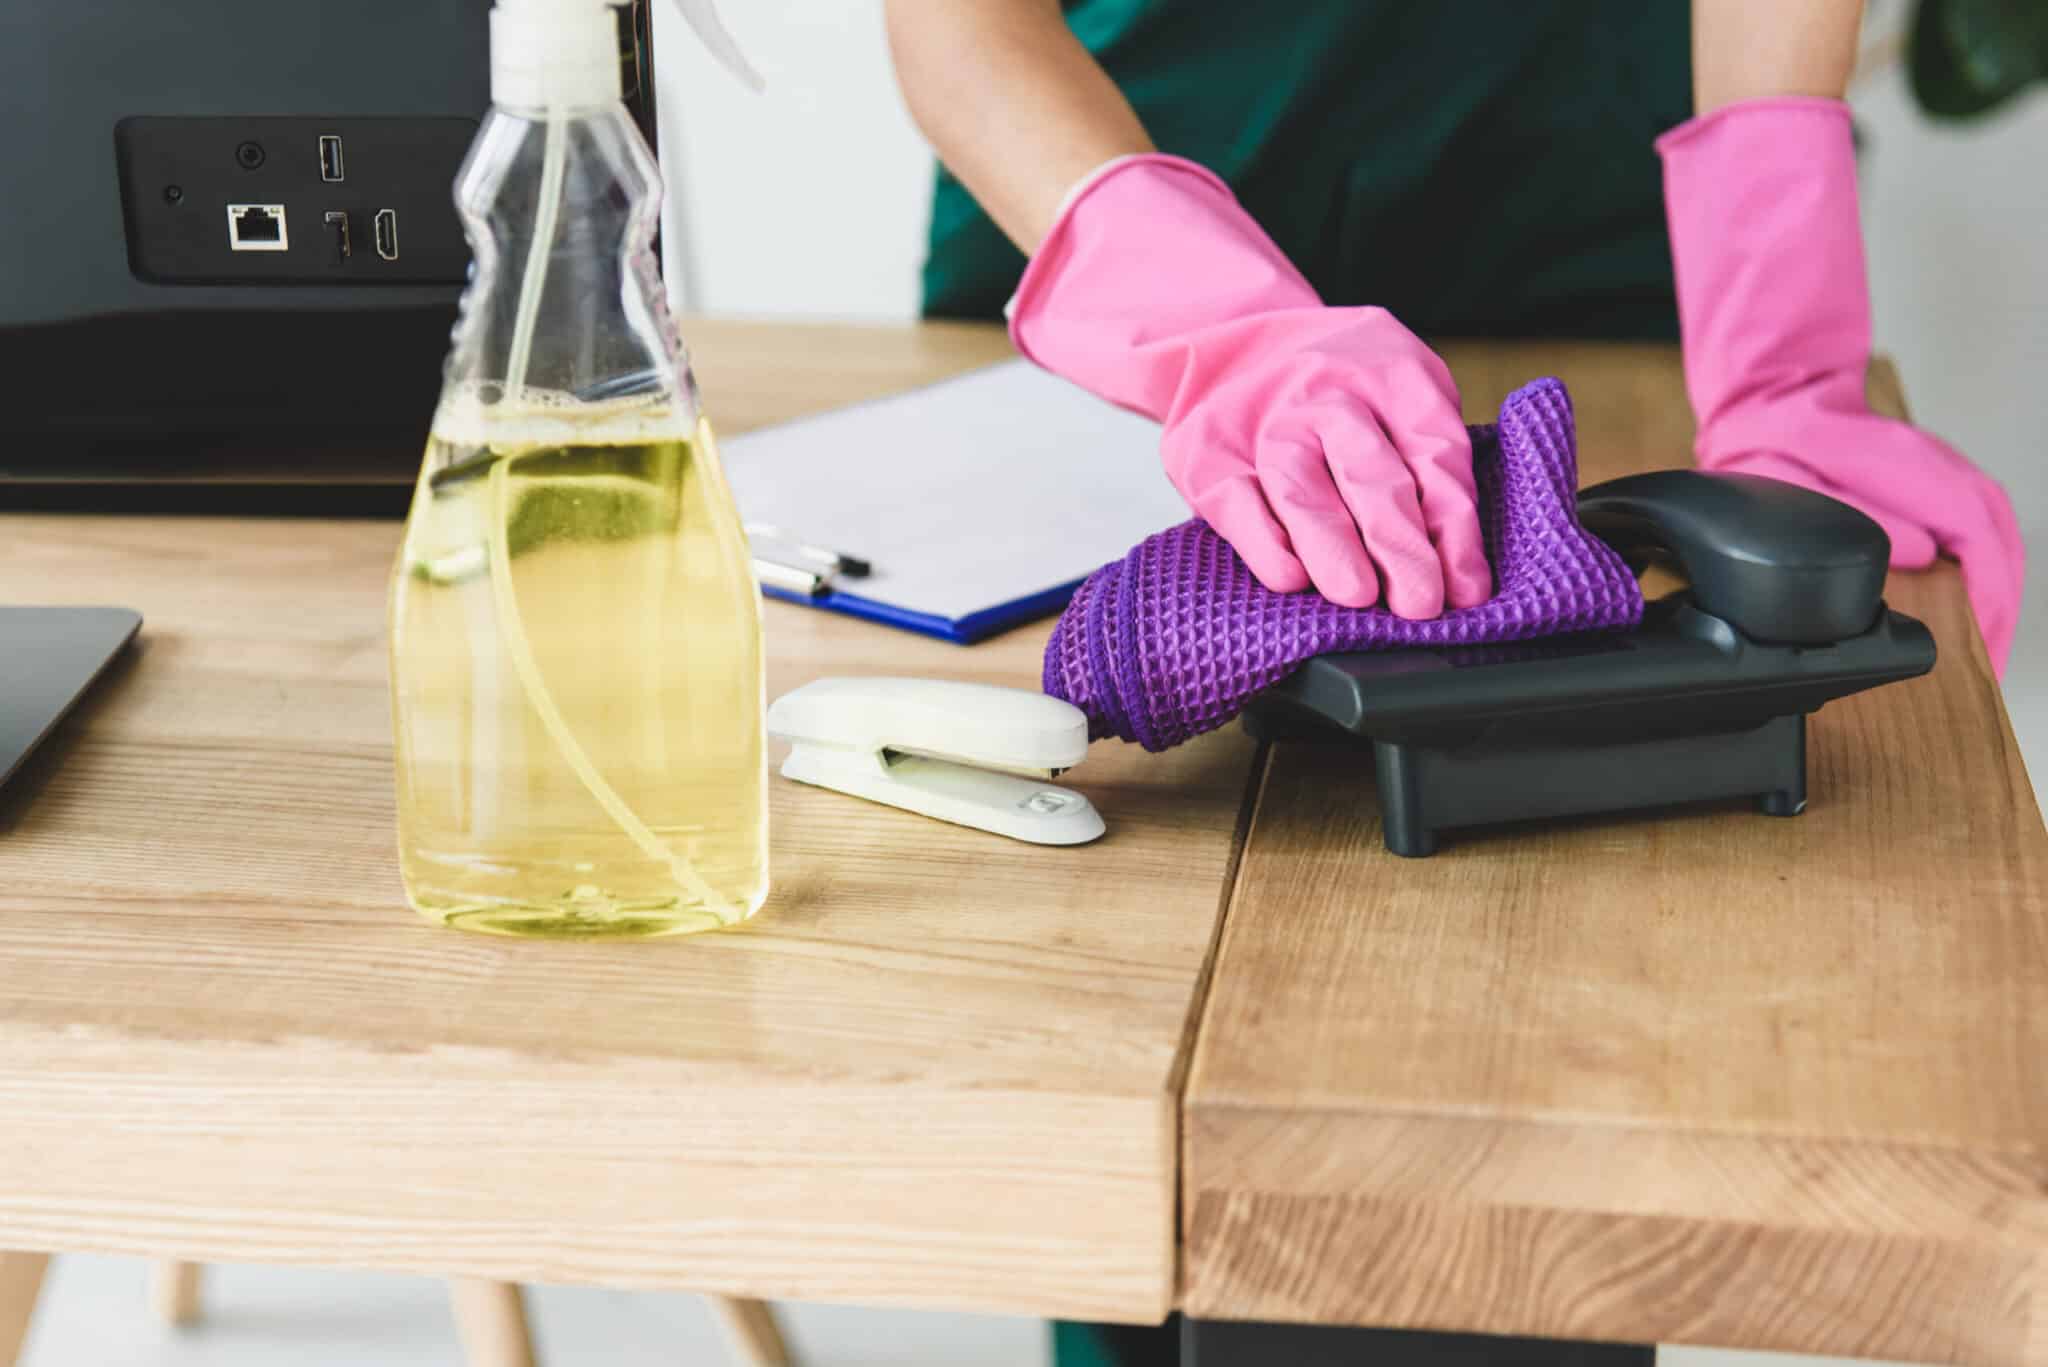 reduce commercial cleaning costs - generic supplies